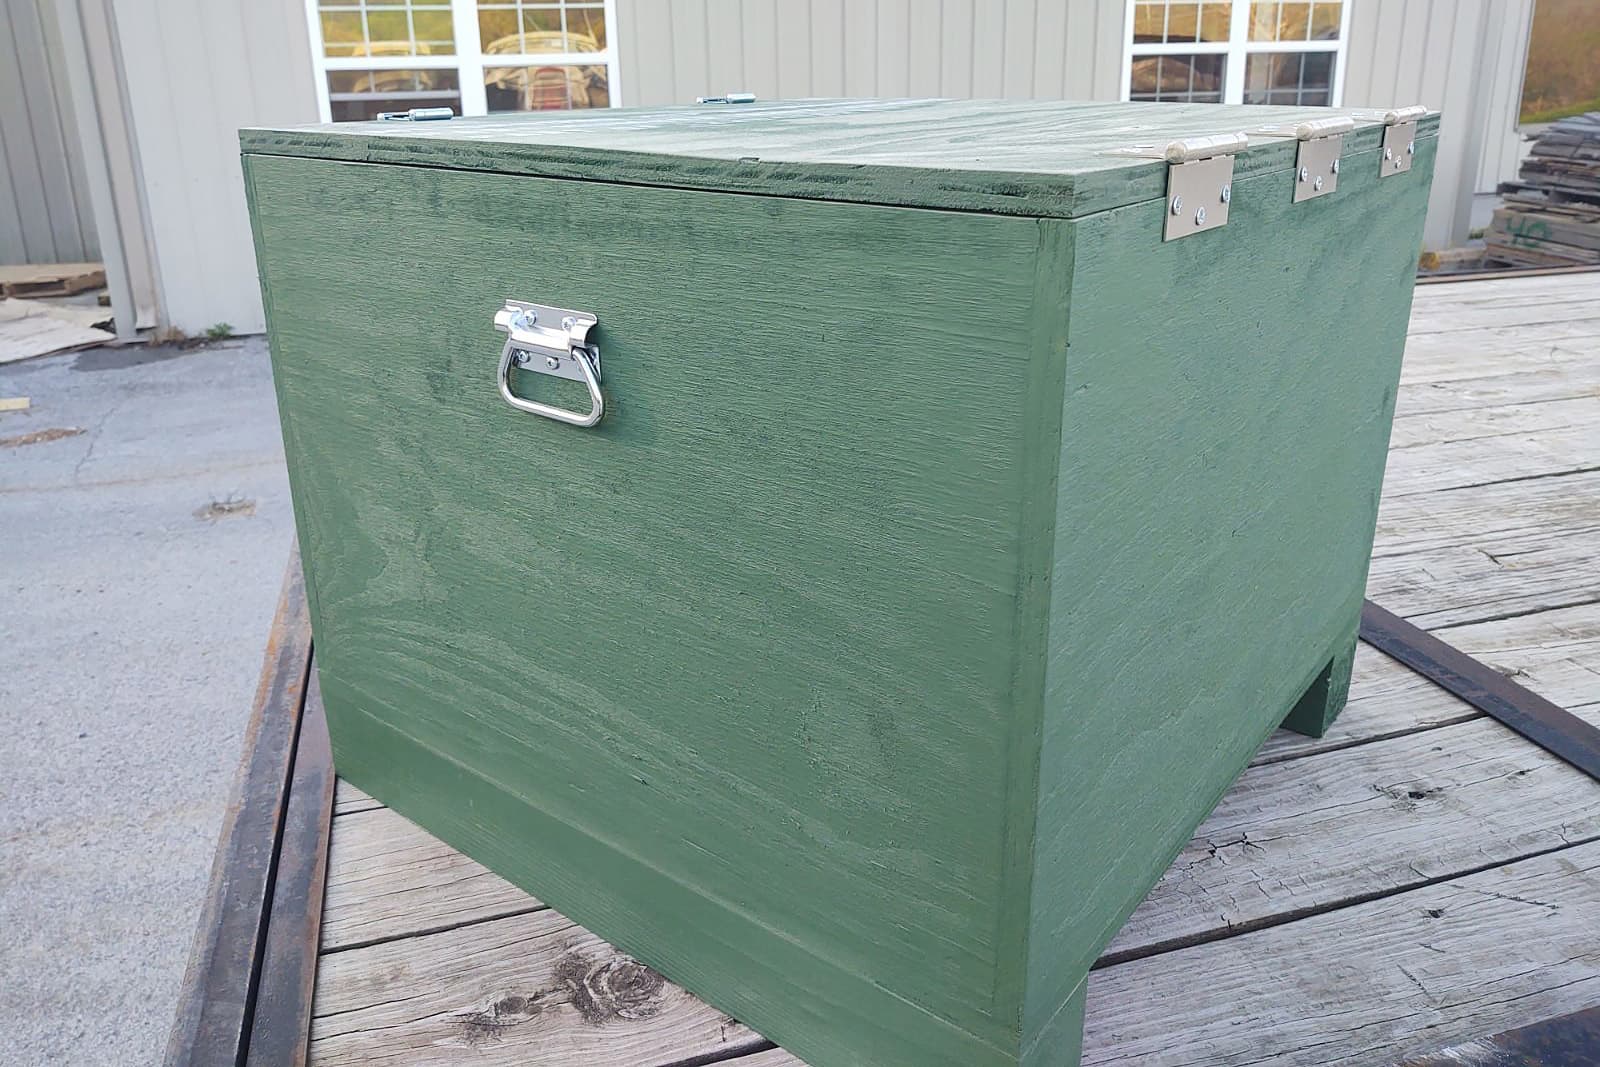 IPCS custom wood crate with green paint and metal handles